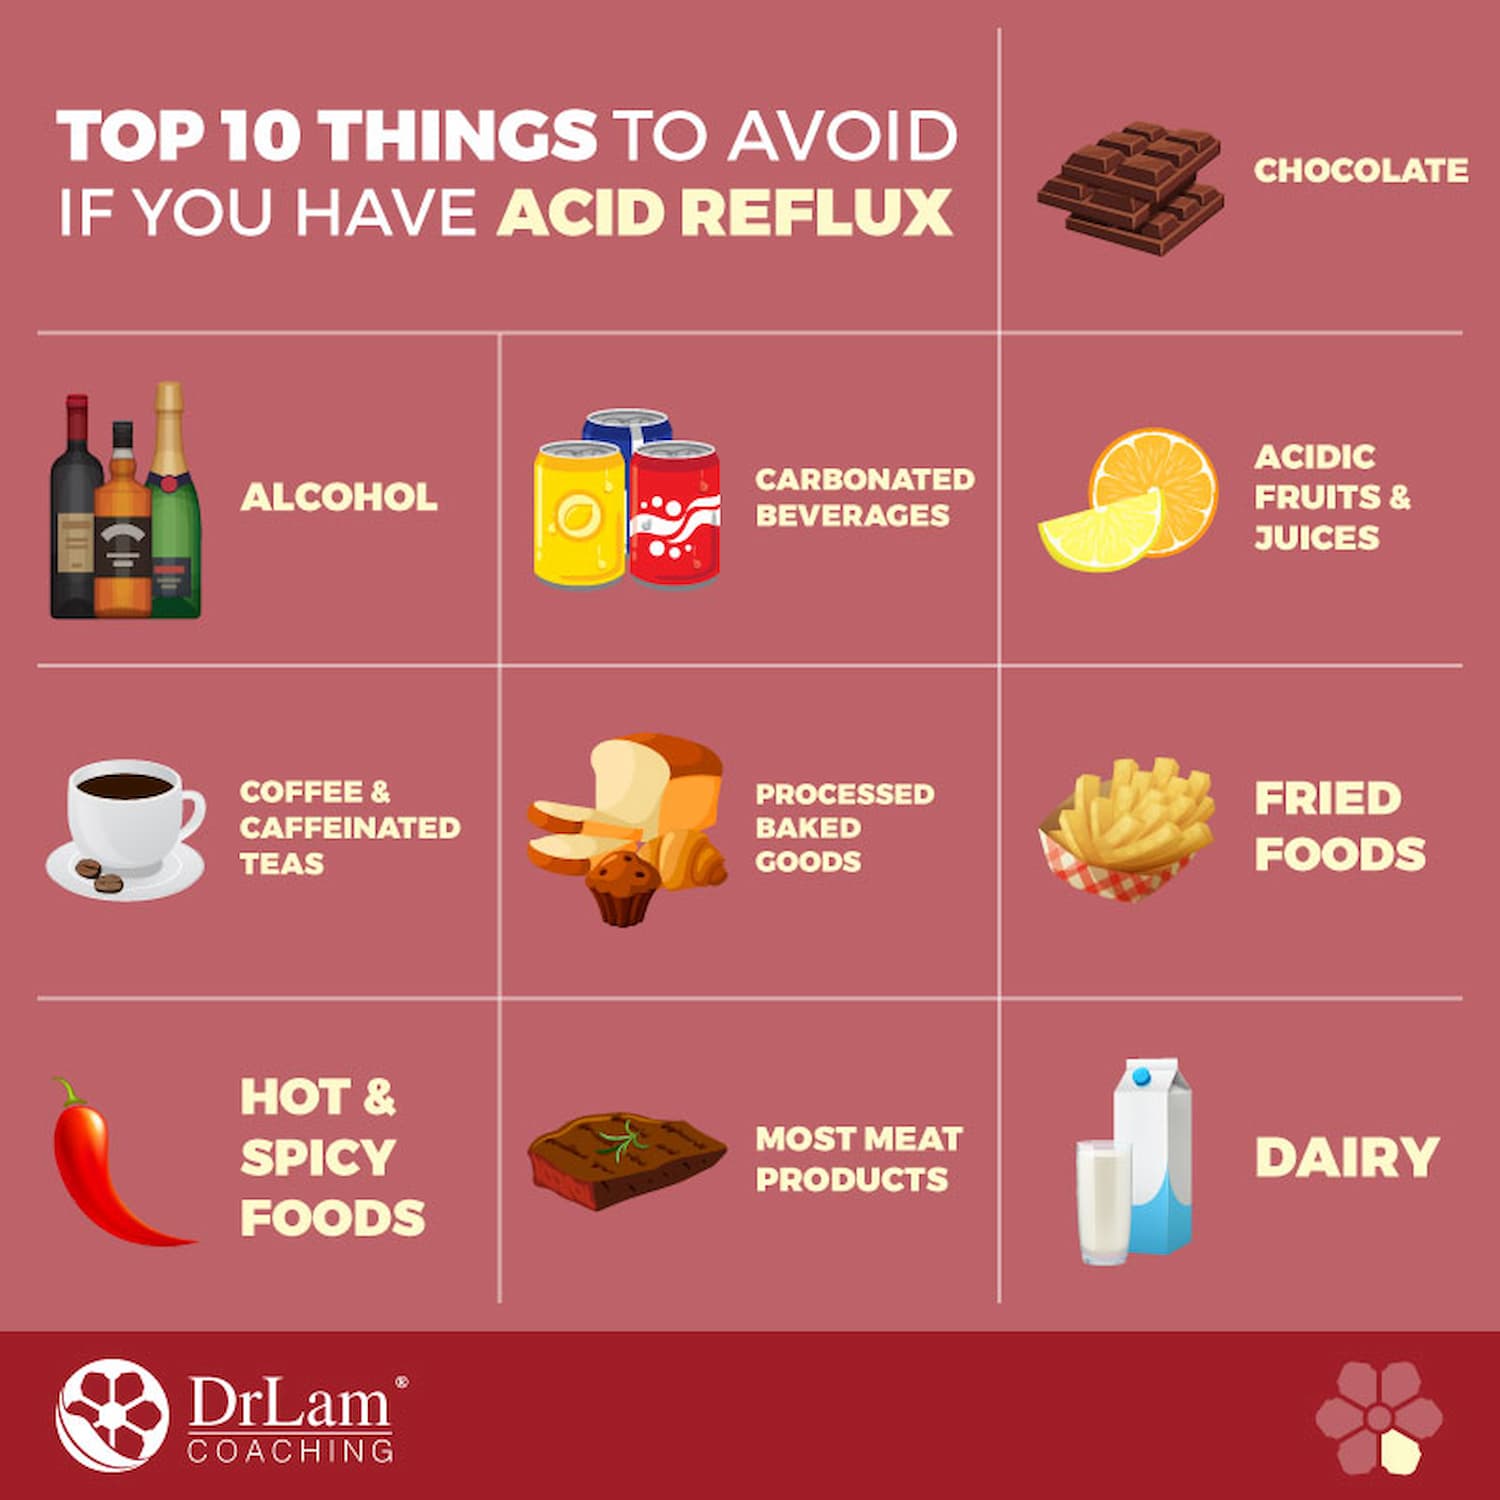 What foods should you avoid if you have acid reflux?